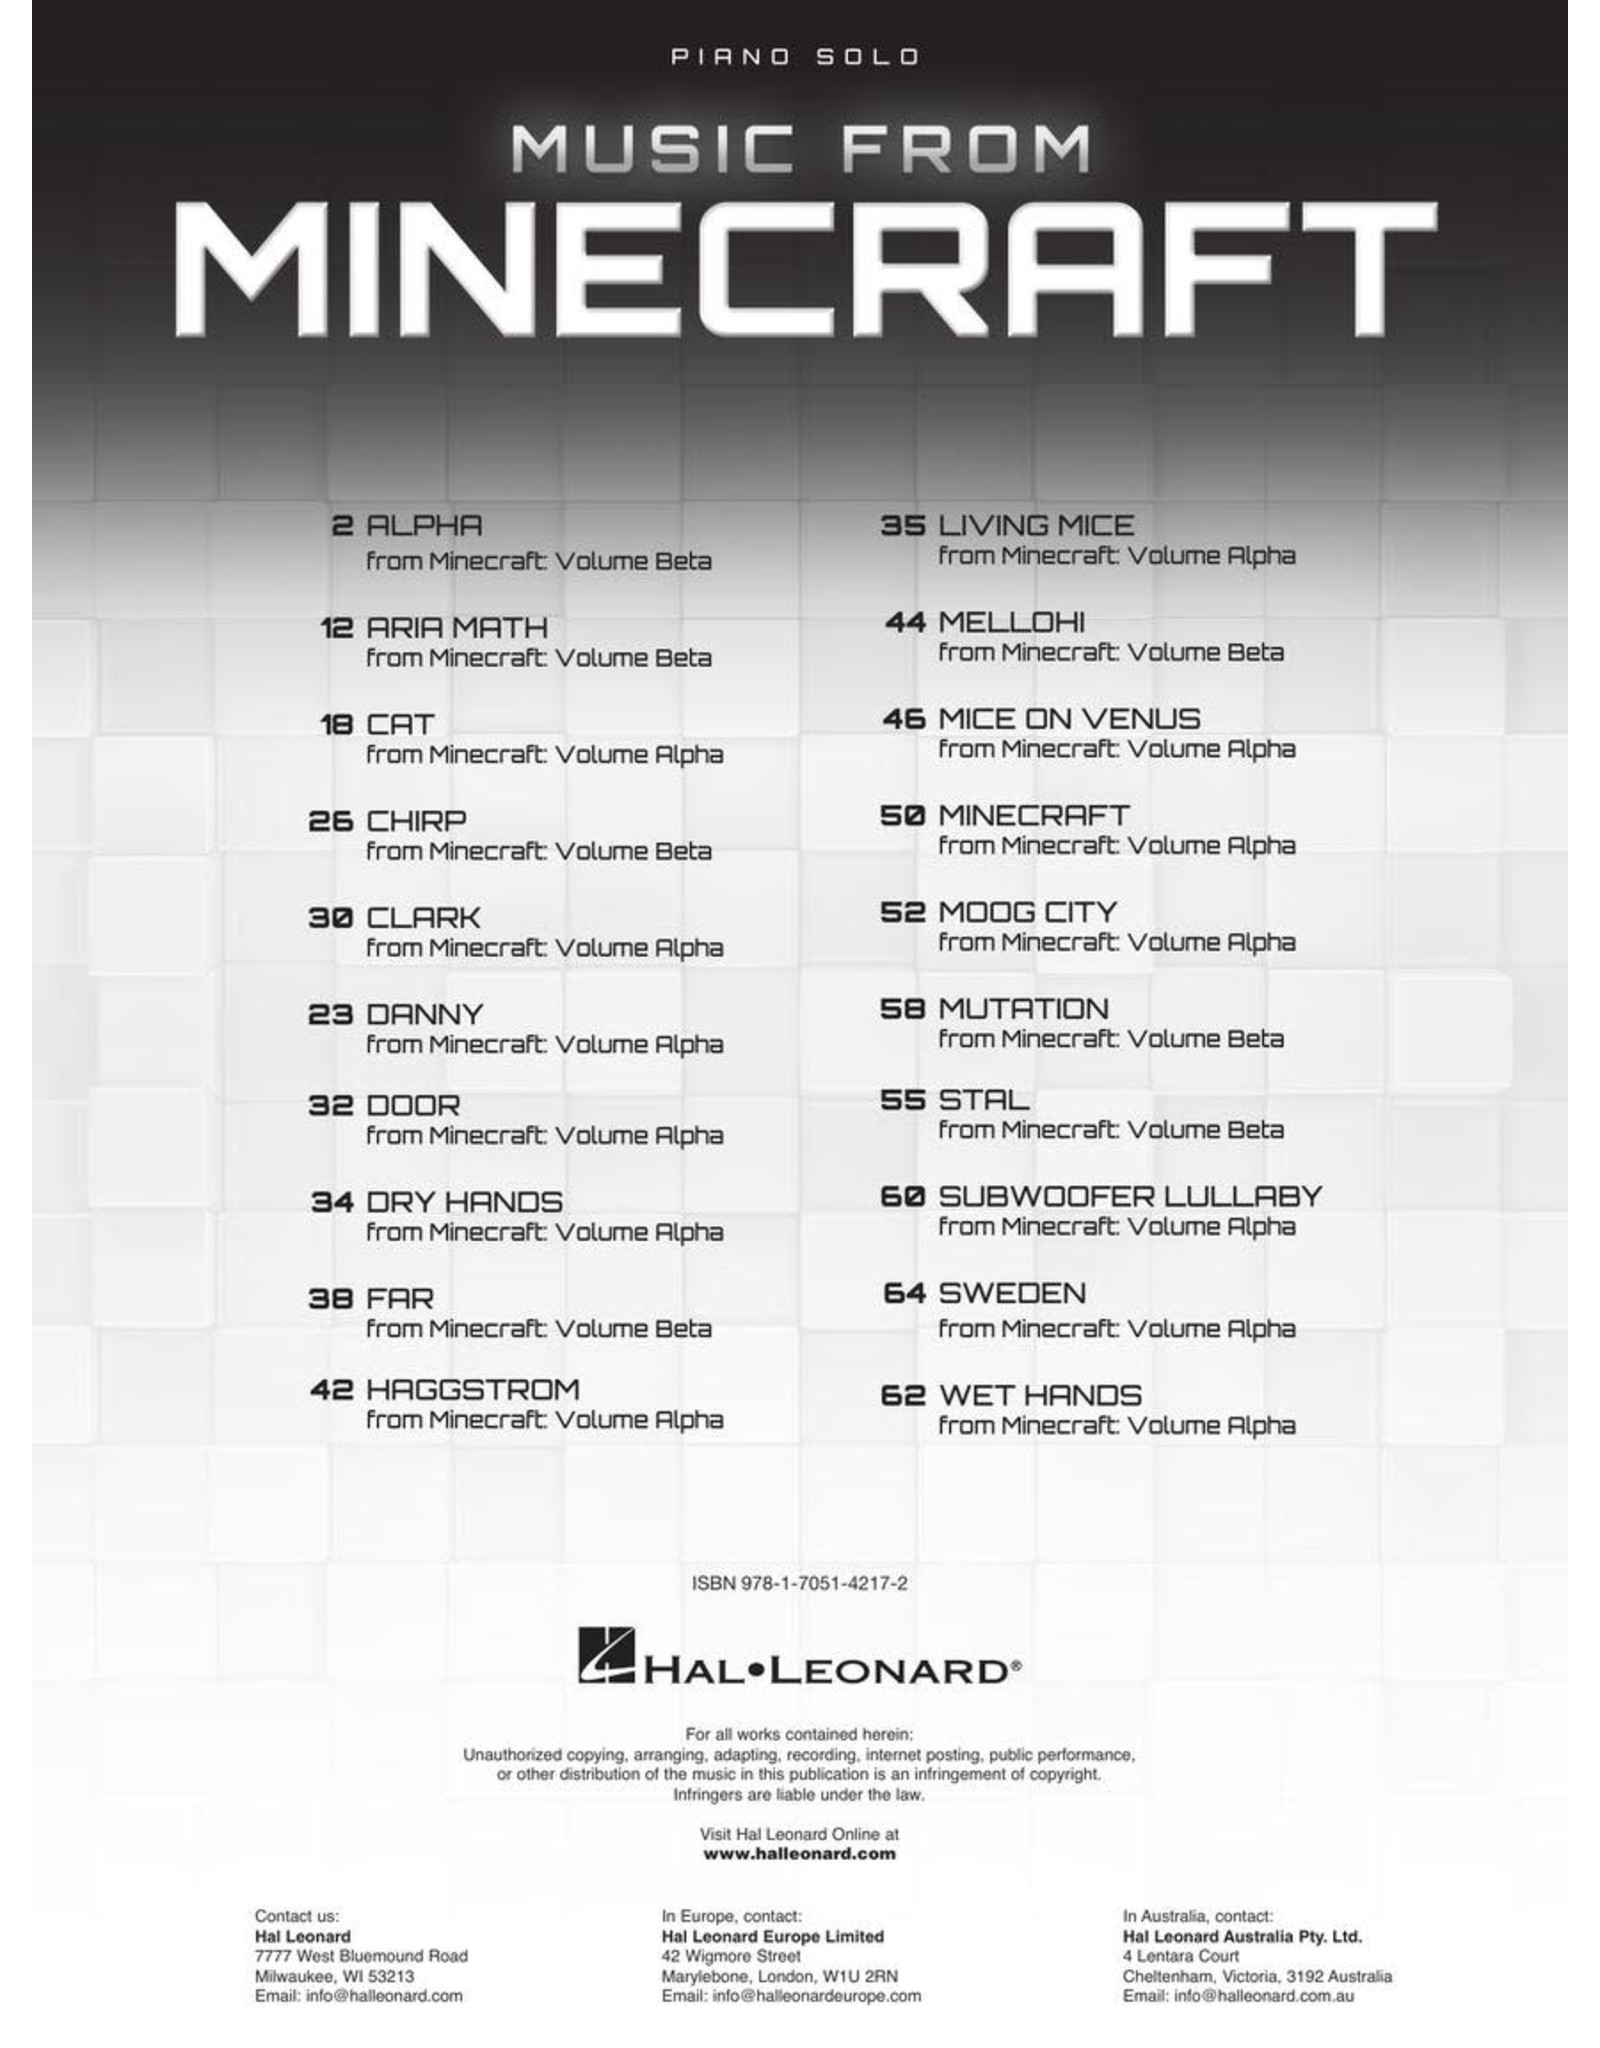 Hal Leonard Music from Minecraft - Piano Solo Collection